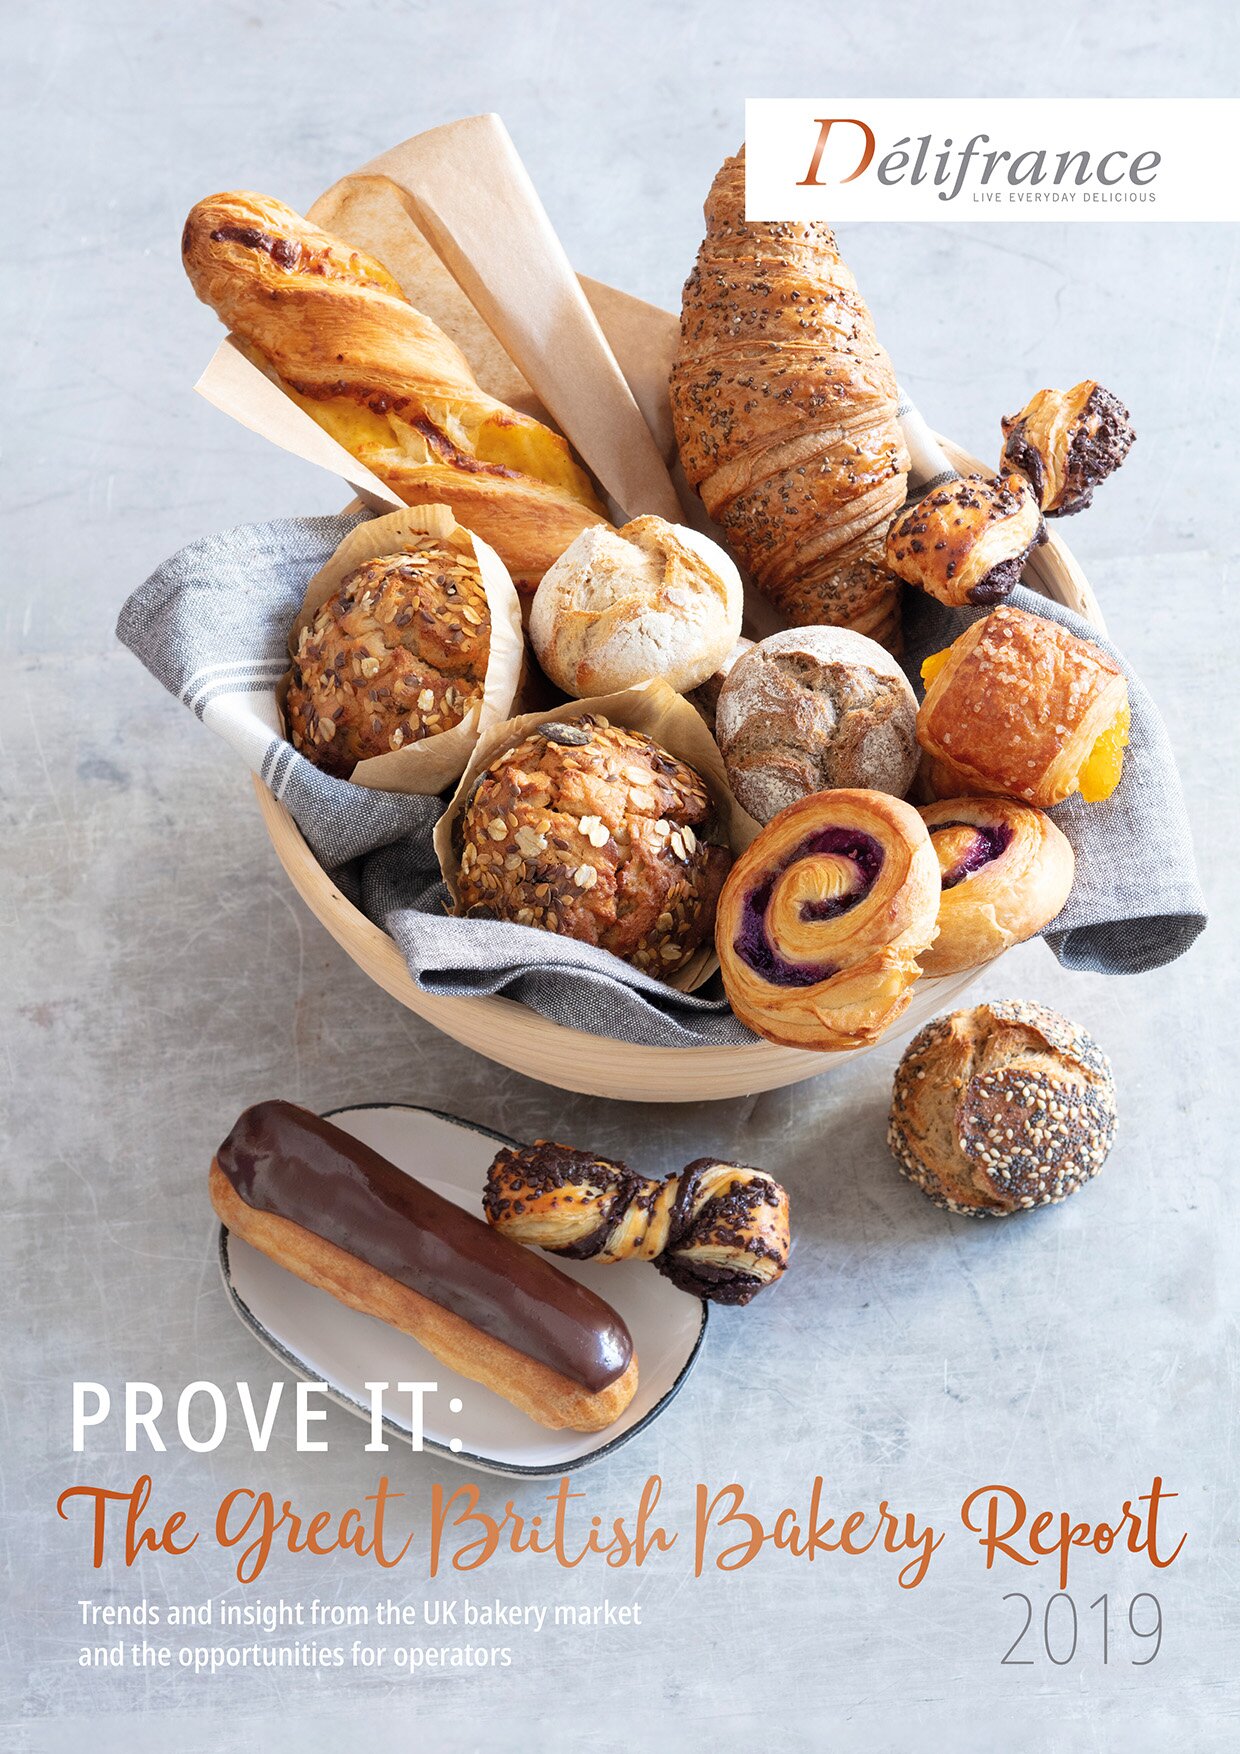 Délifrance reveals bakery trends for 2019 and beyond